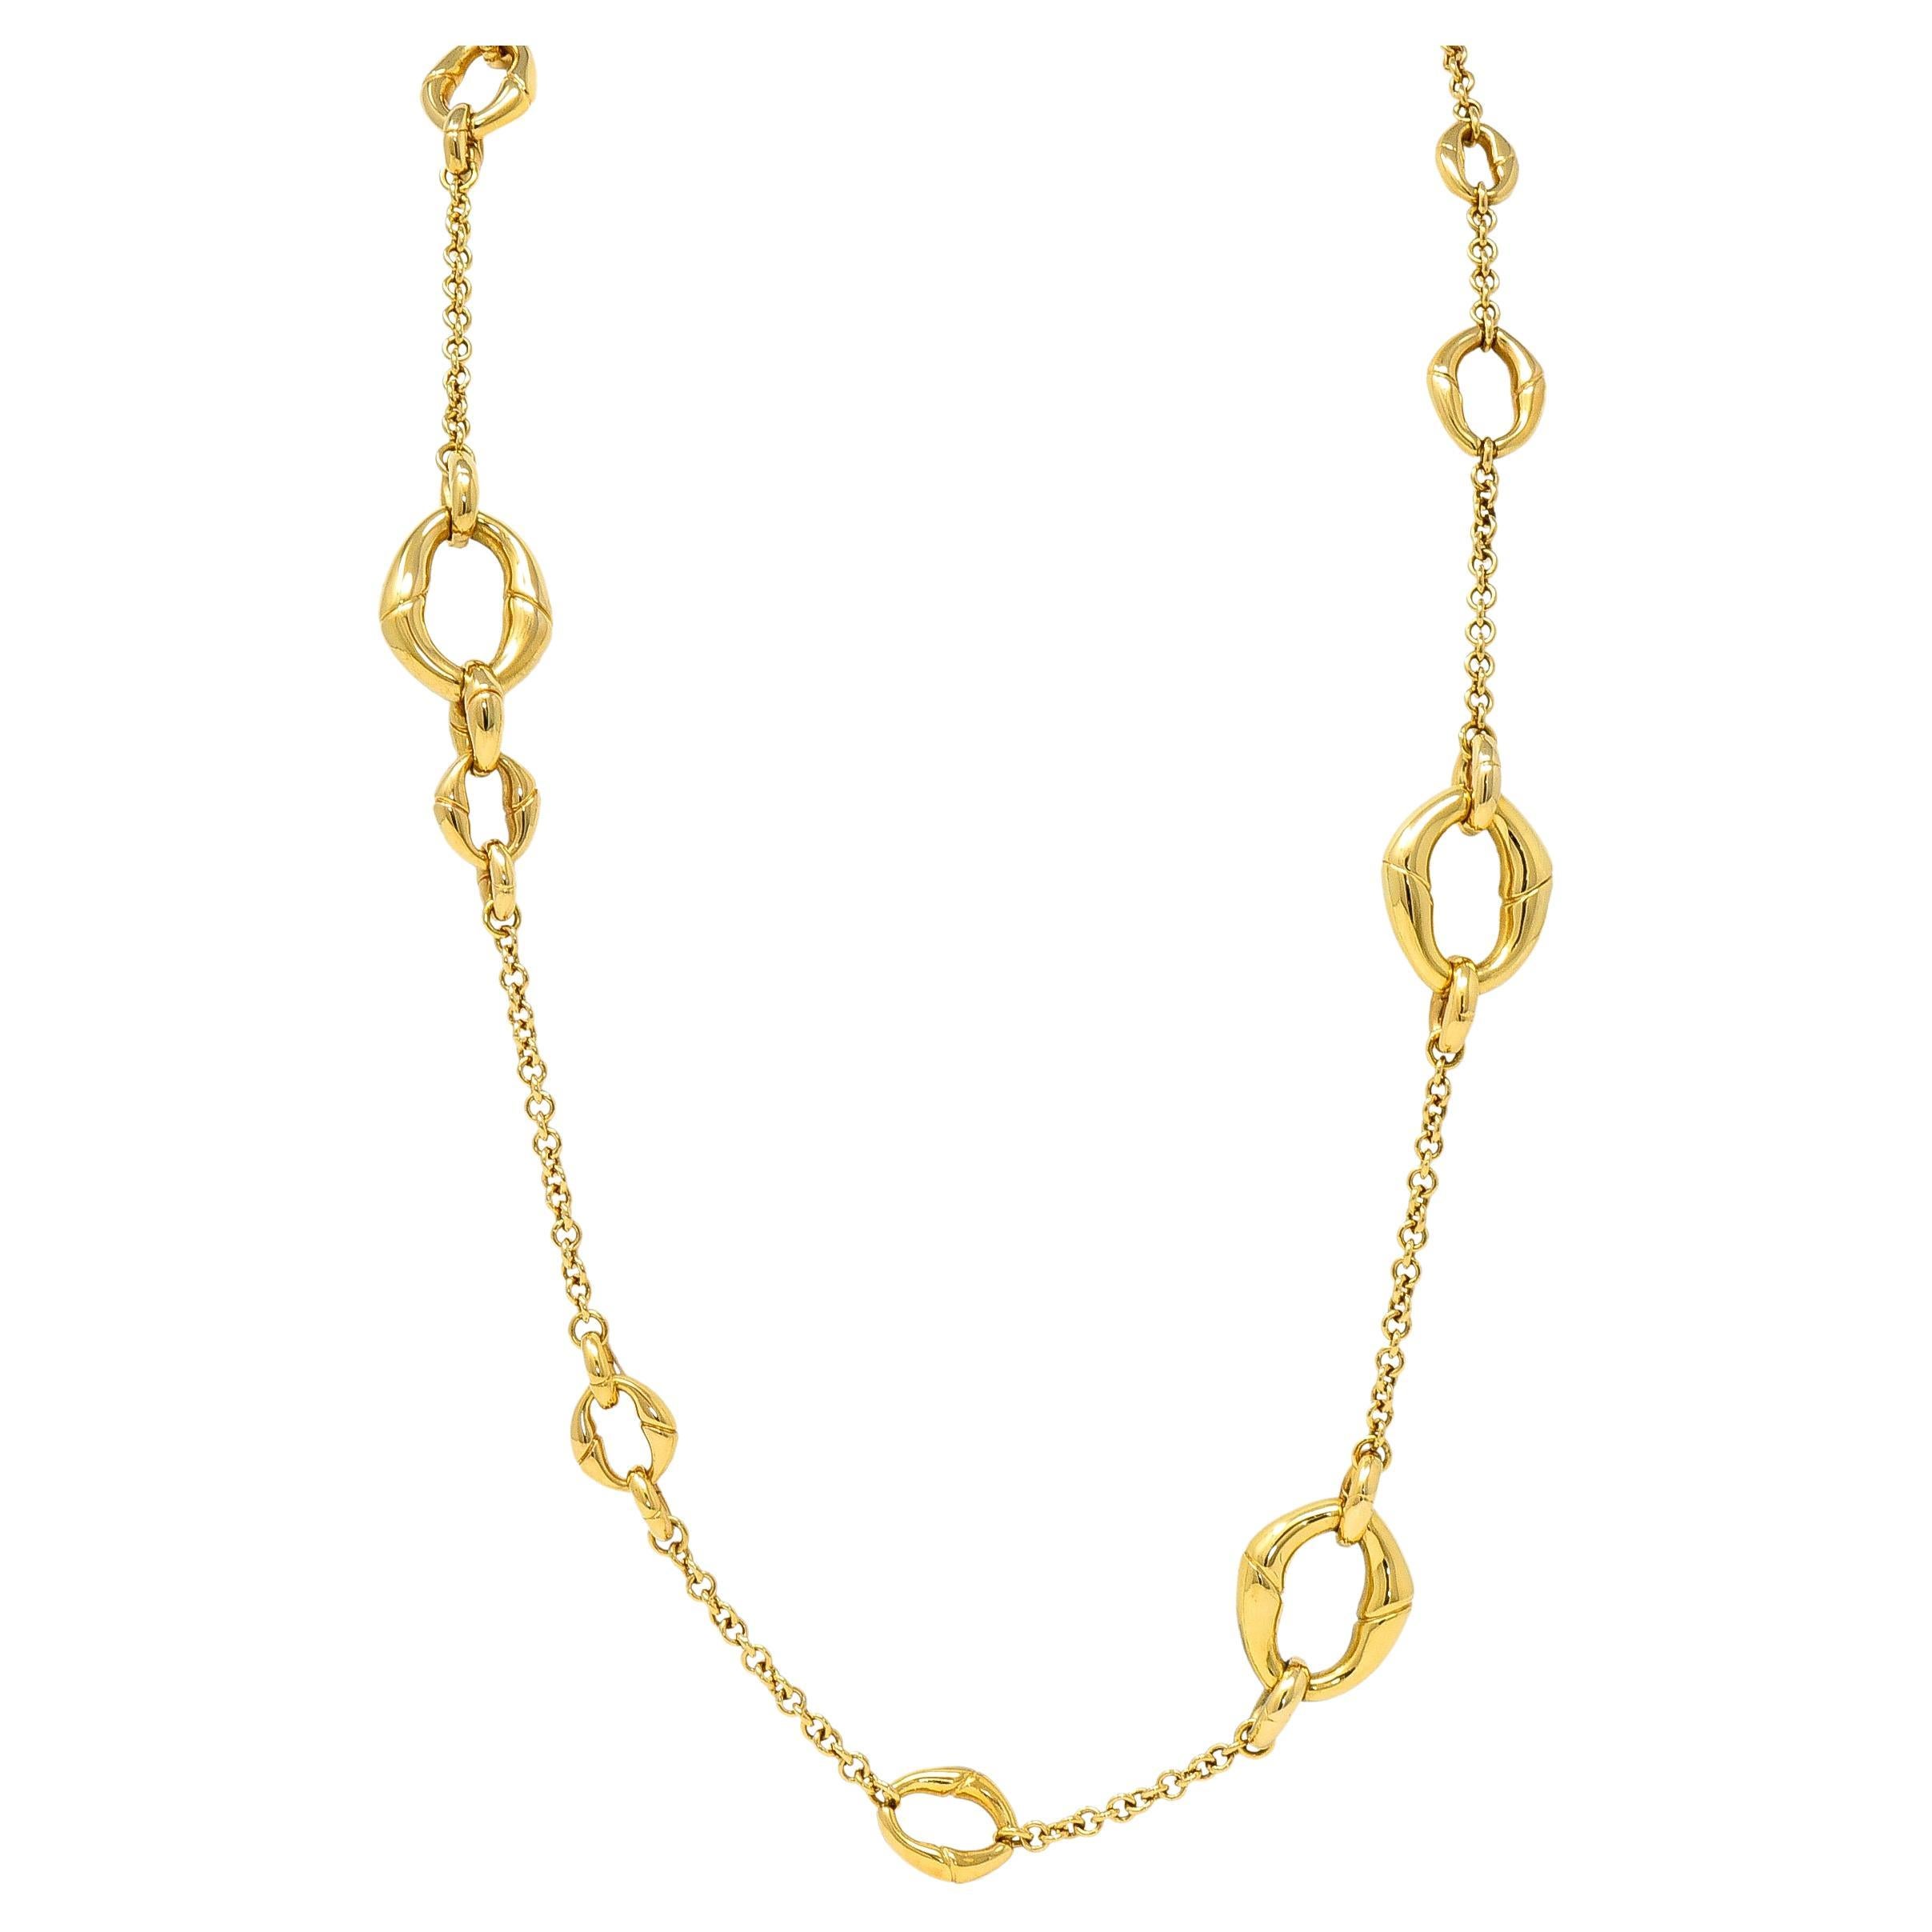 Gucci Contemporary 18 Karat Yellow Gold Bamboo Link Station Necklace 2